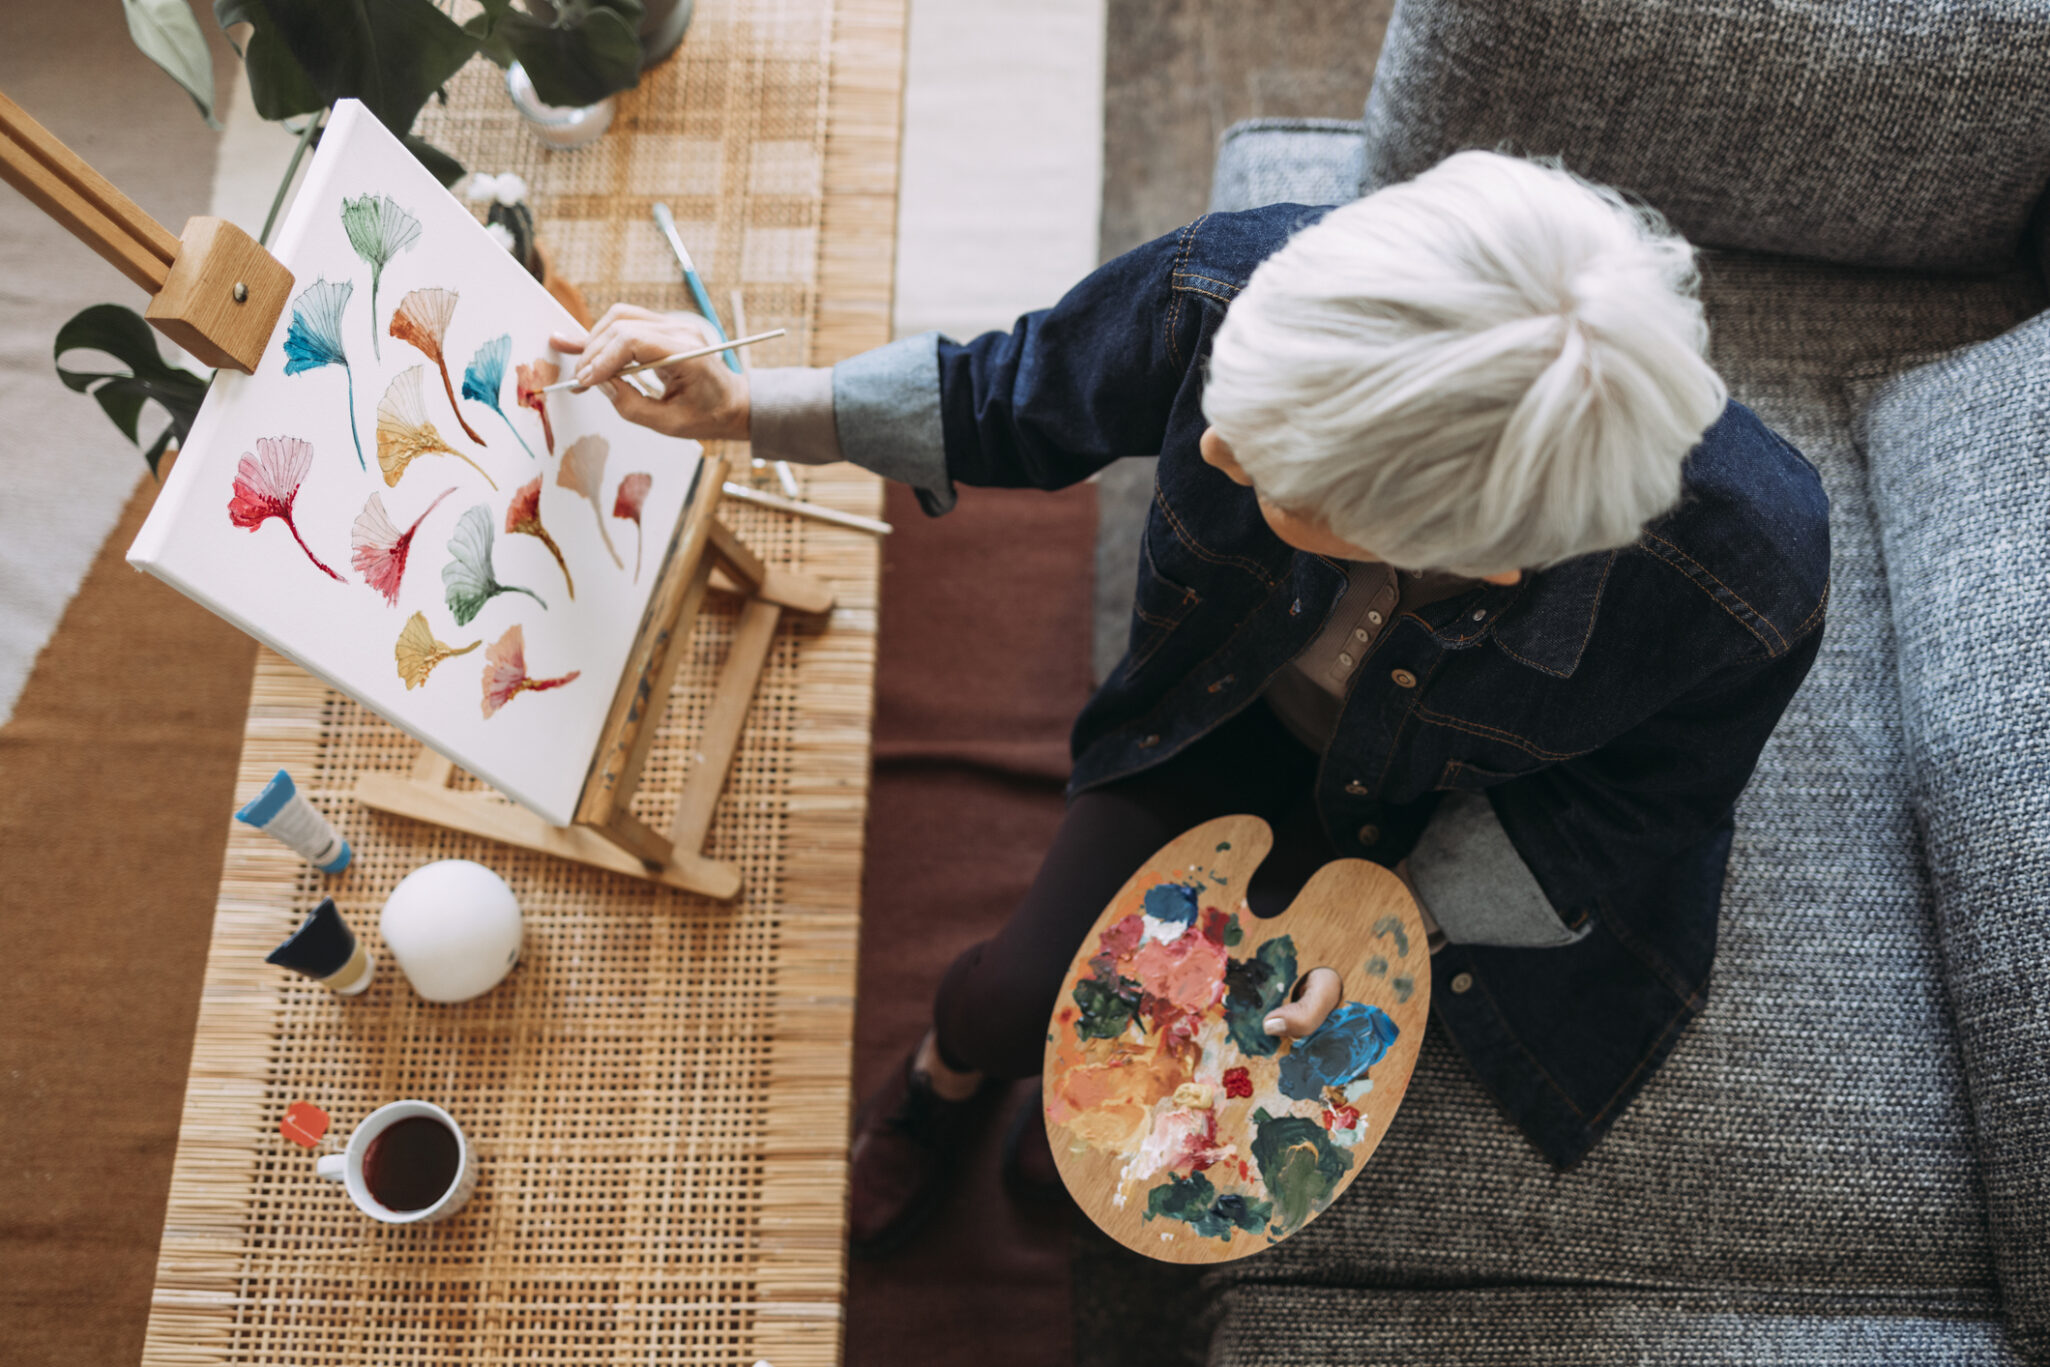 A top down photo of an older woman sitting on a couch and painting a flowers